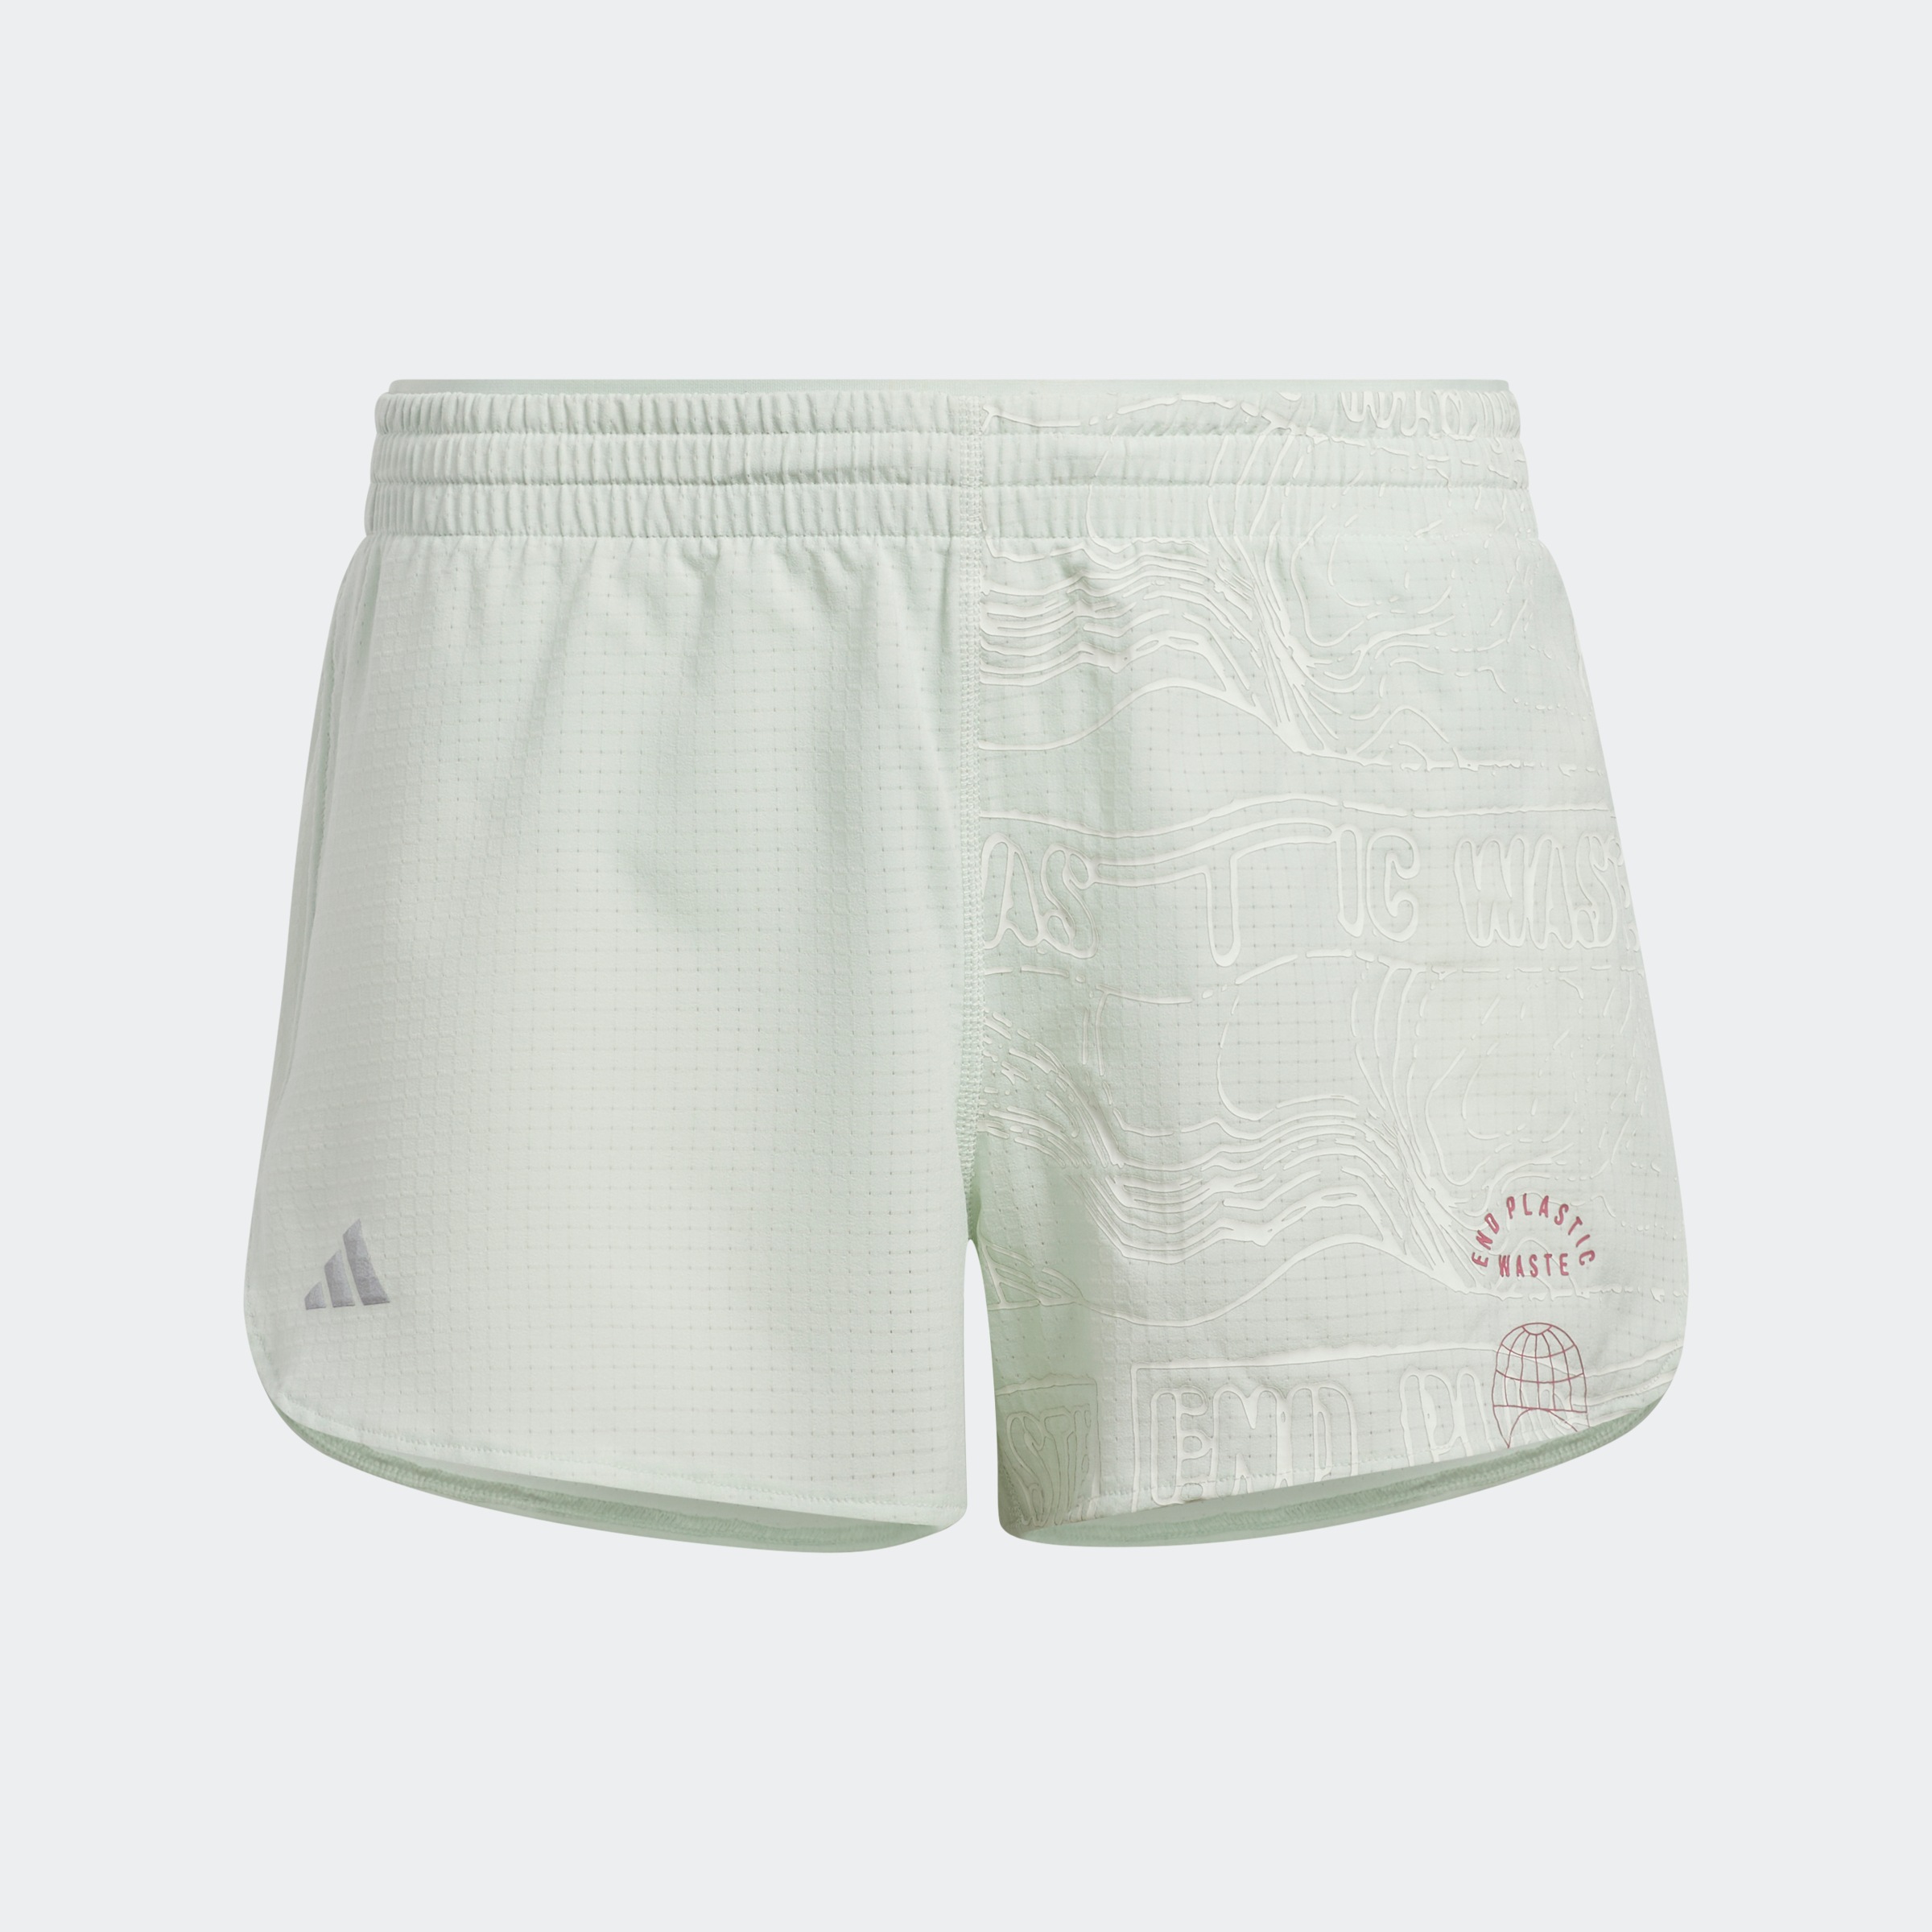 adidas Performance (1 »RUN ♕ FOR bei OCEANS SHORTS«, THE Laufshorts tlg.)